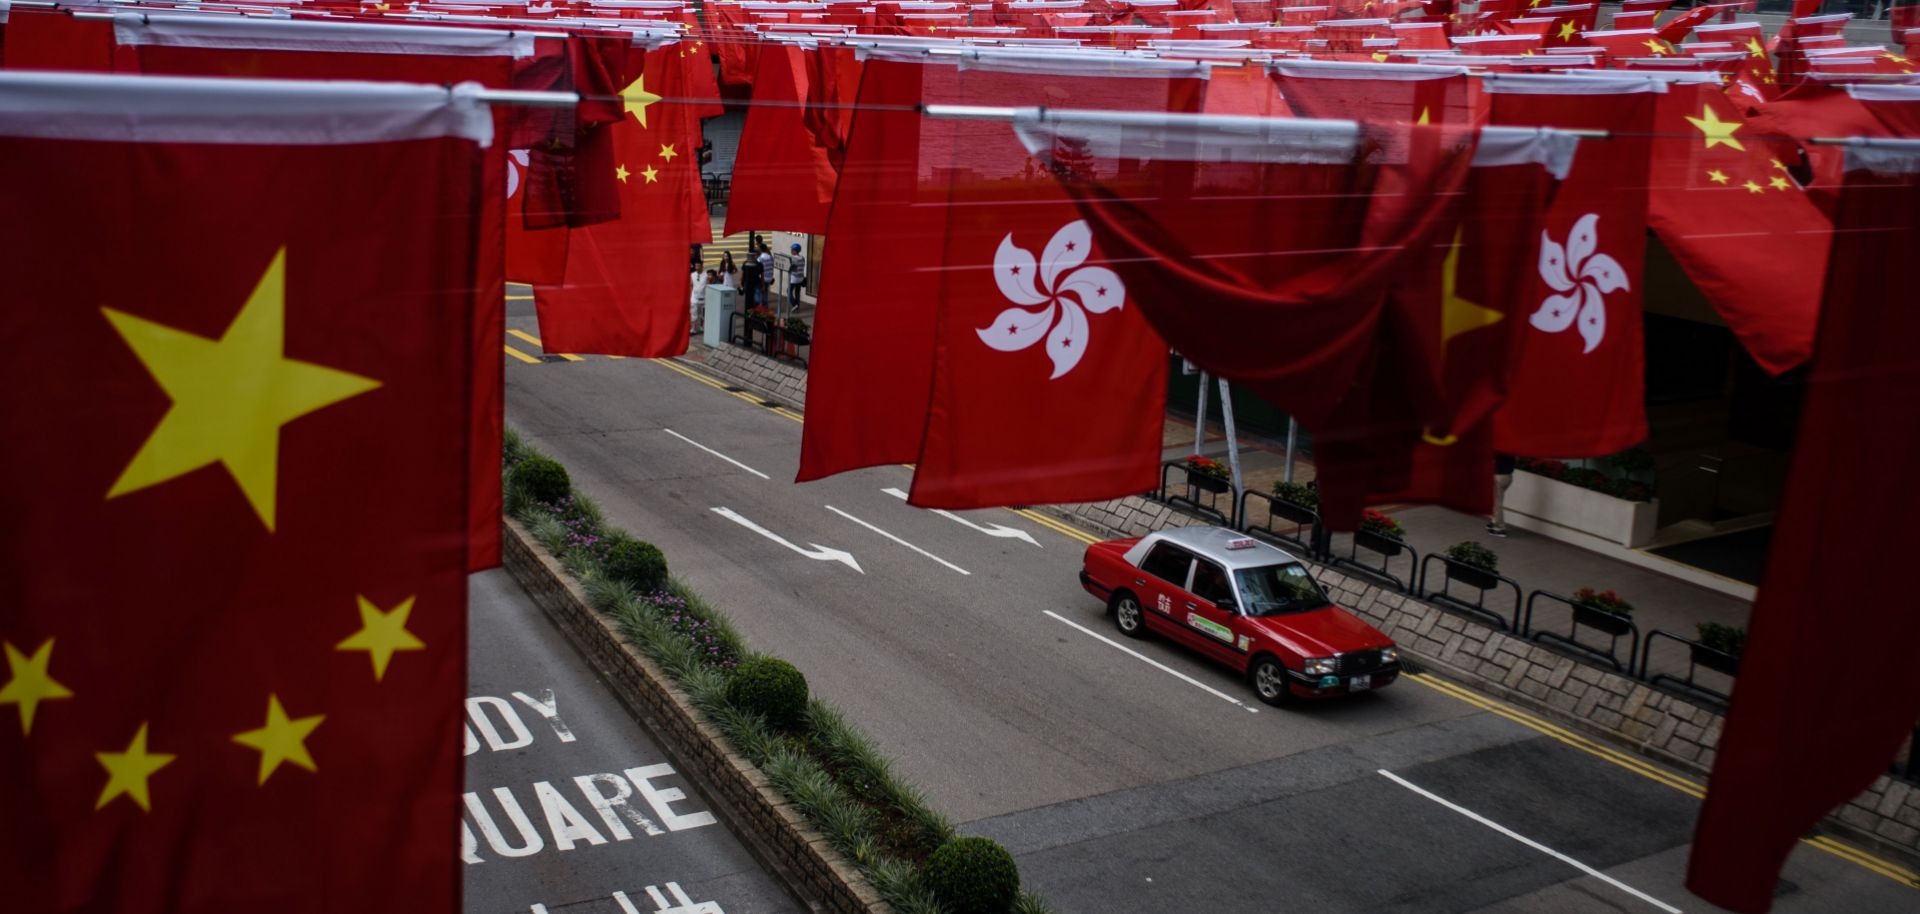 The national flags of China and Hong Kong hang above the street in anticipation of the 20-year anniversary of the handover of the city from the United Kingdom.